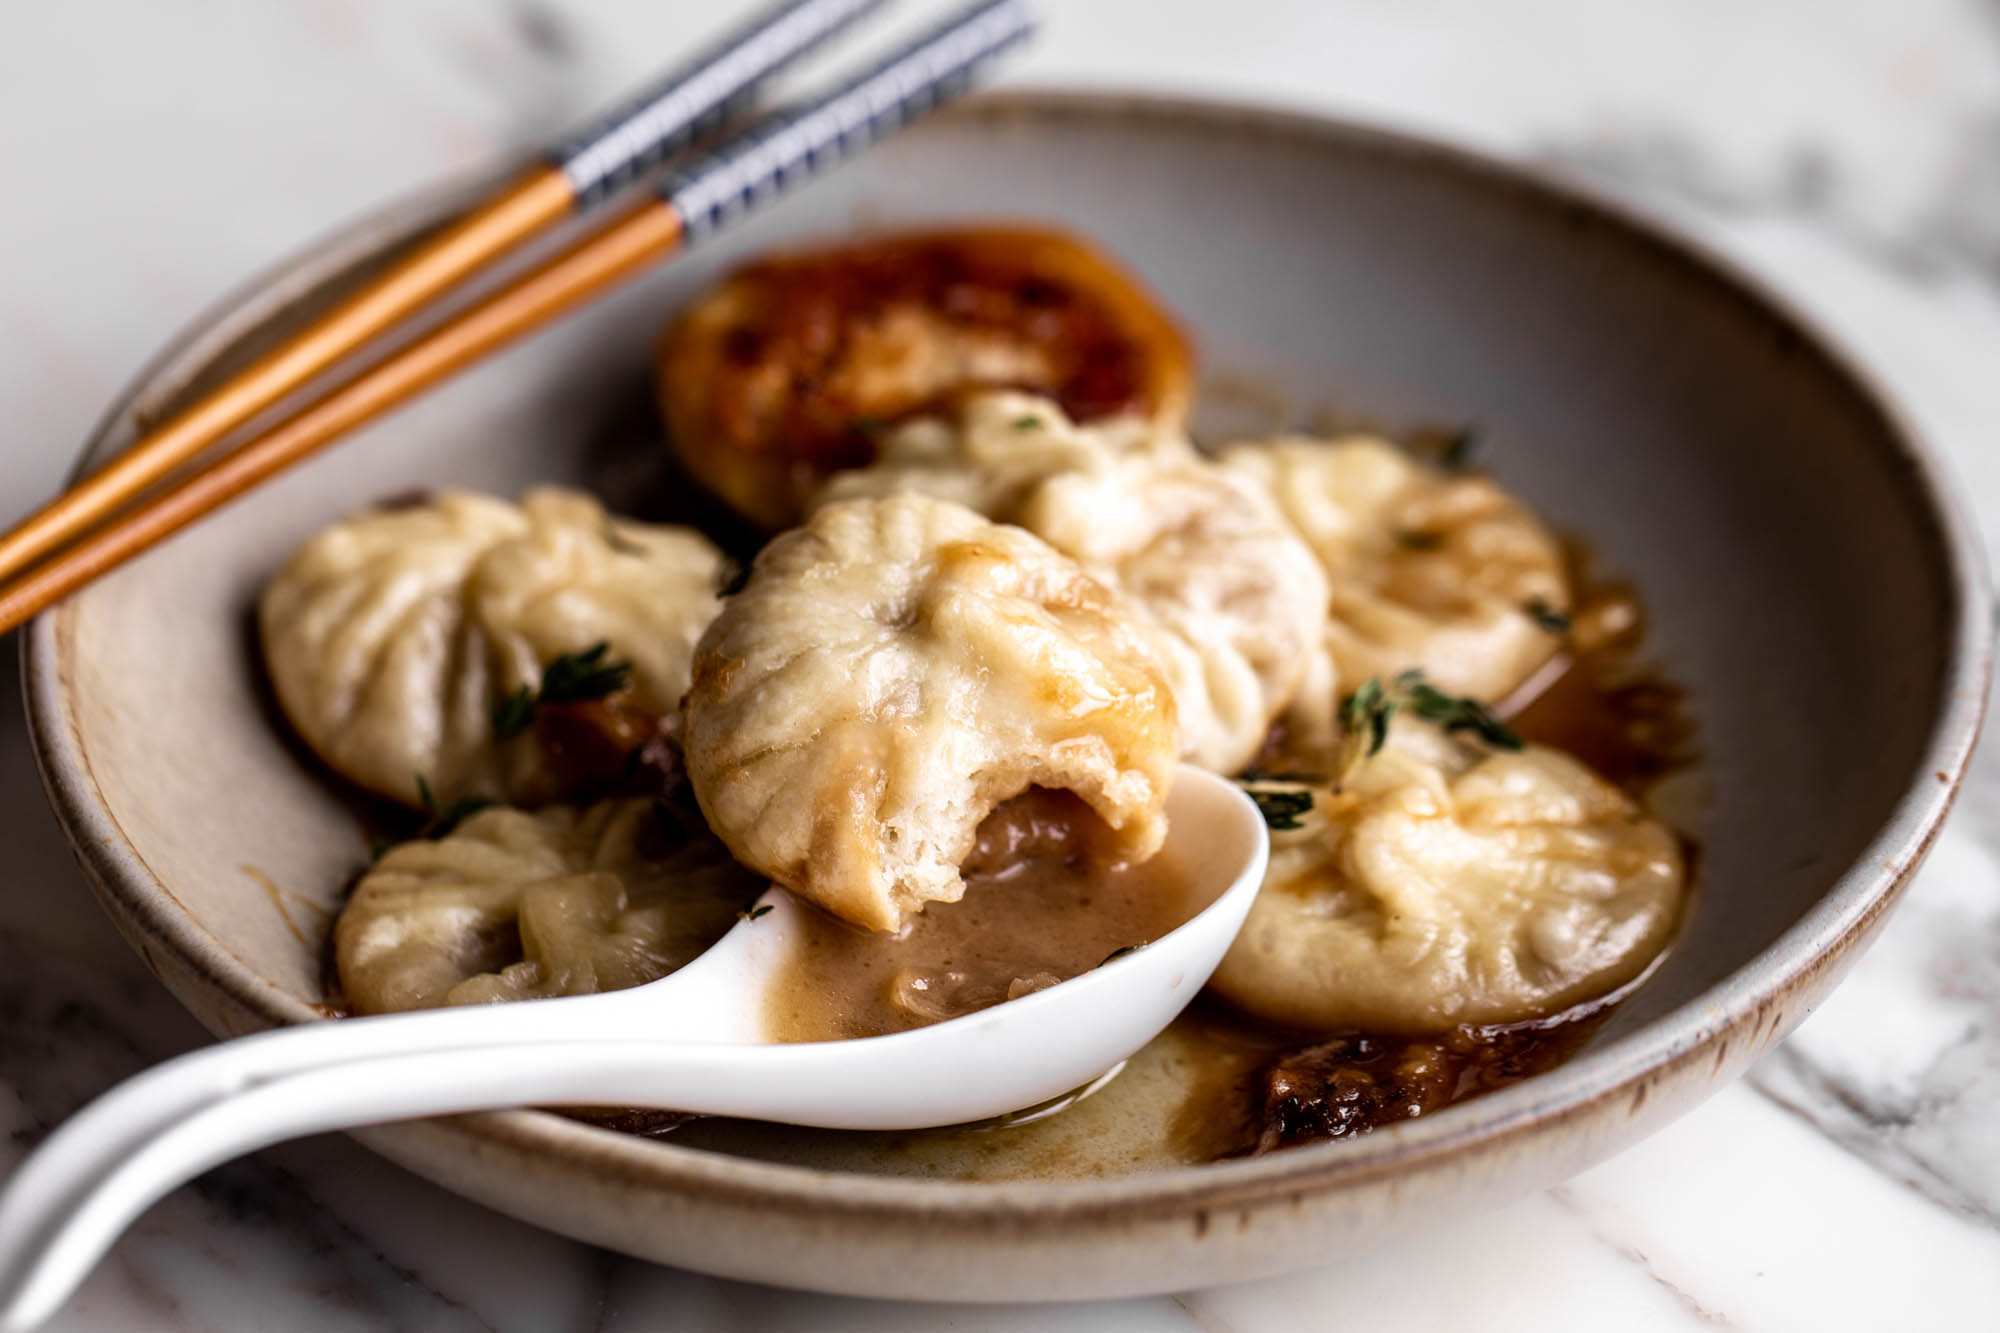 https://cookingwithcocktailrings.com/wp-content/uploads/2022/10/French-onion-soup-dumplings-162.jpg